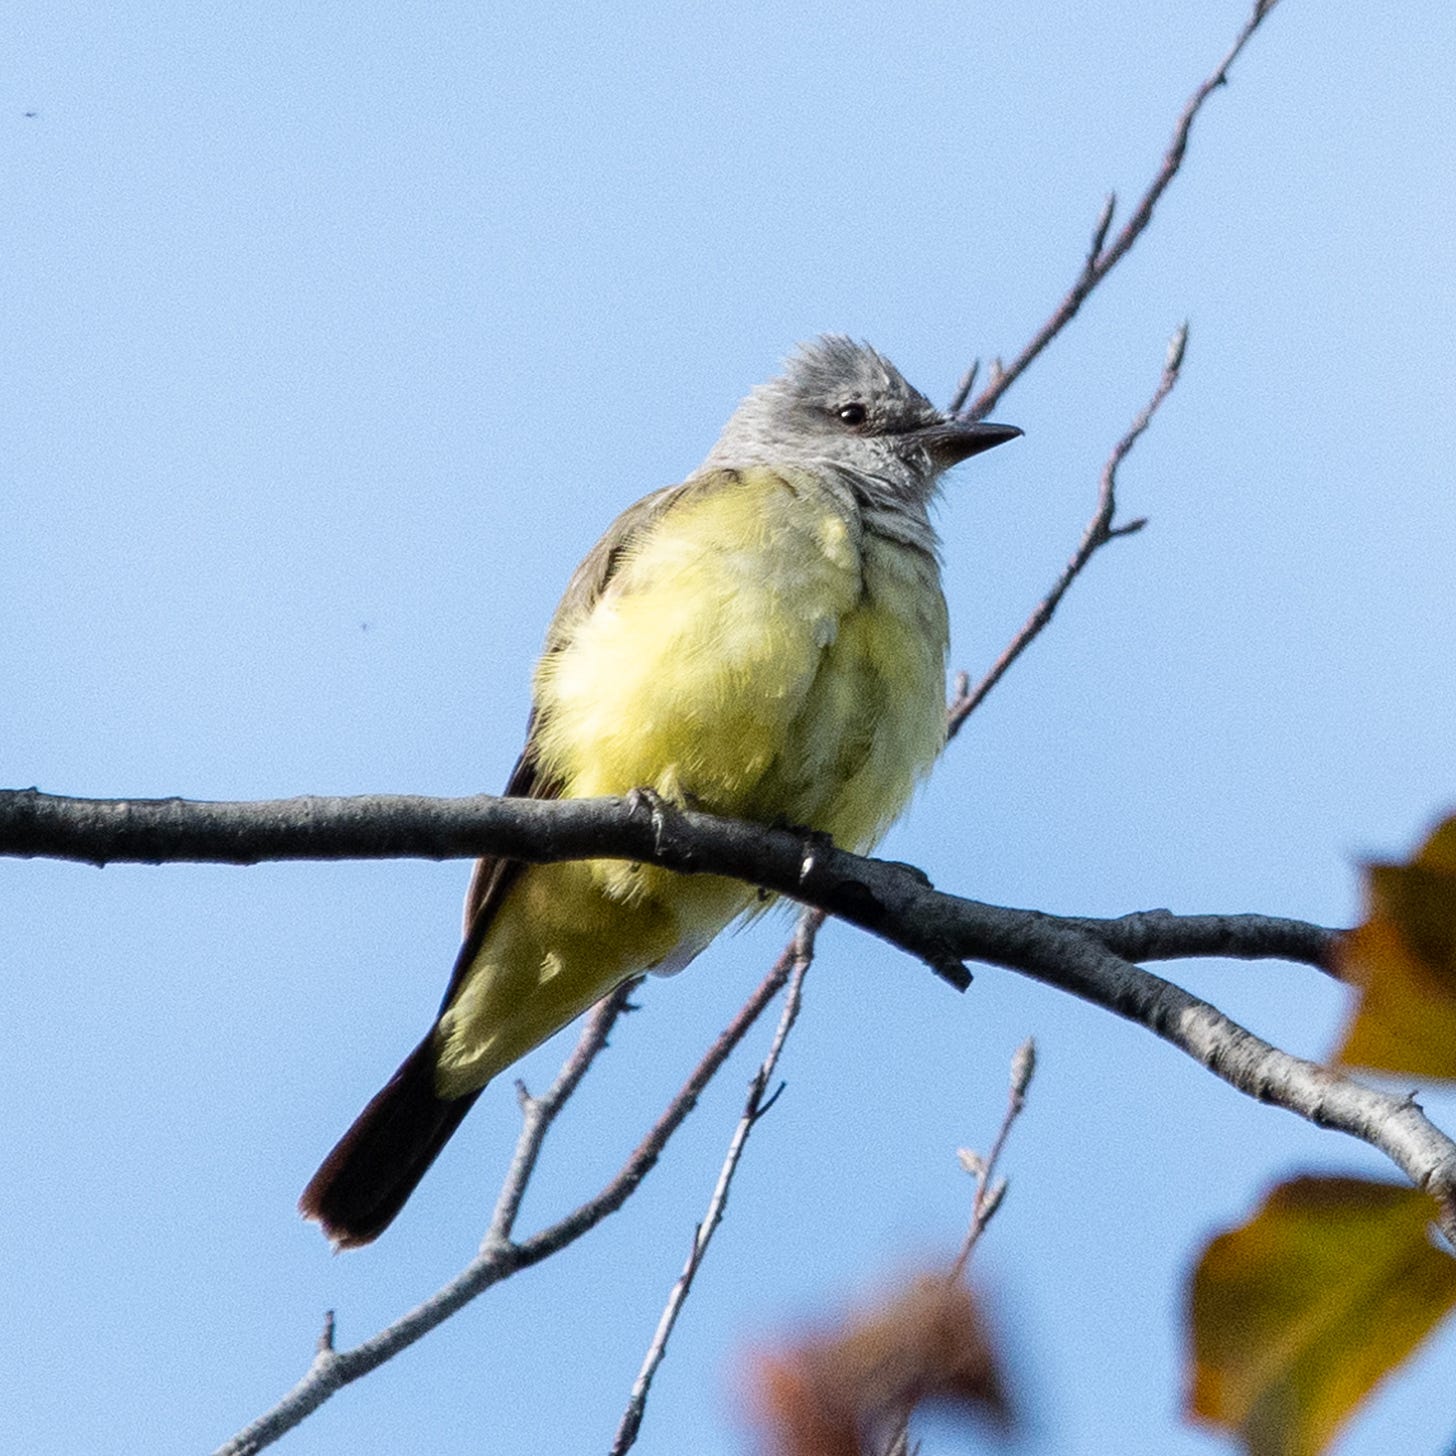 A Western kingbird, with a bluish gray head and breast and a yellow belly, is perched on a bare branch